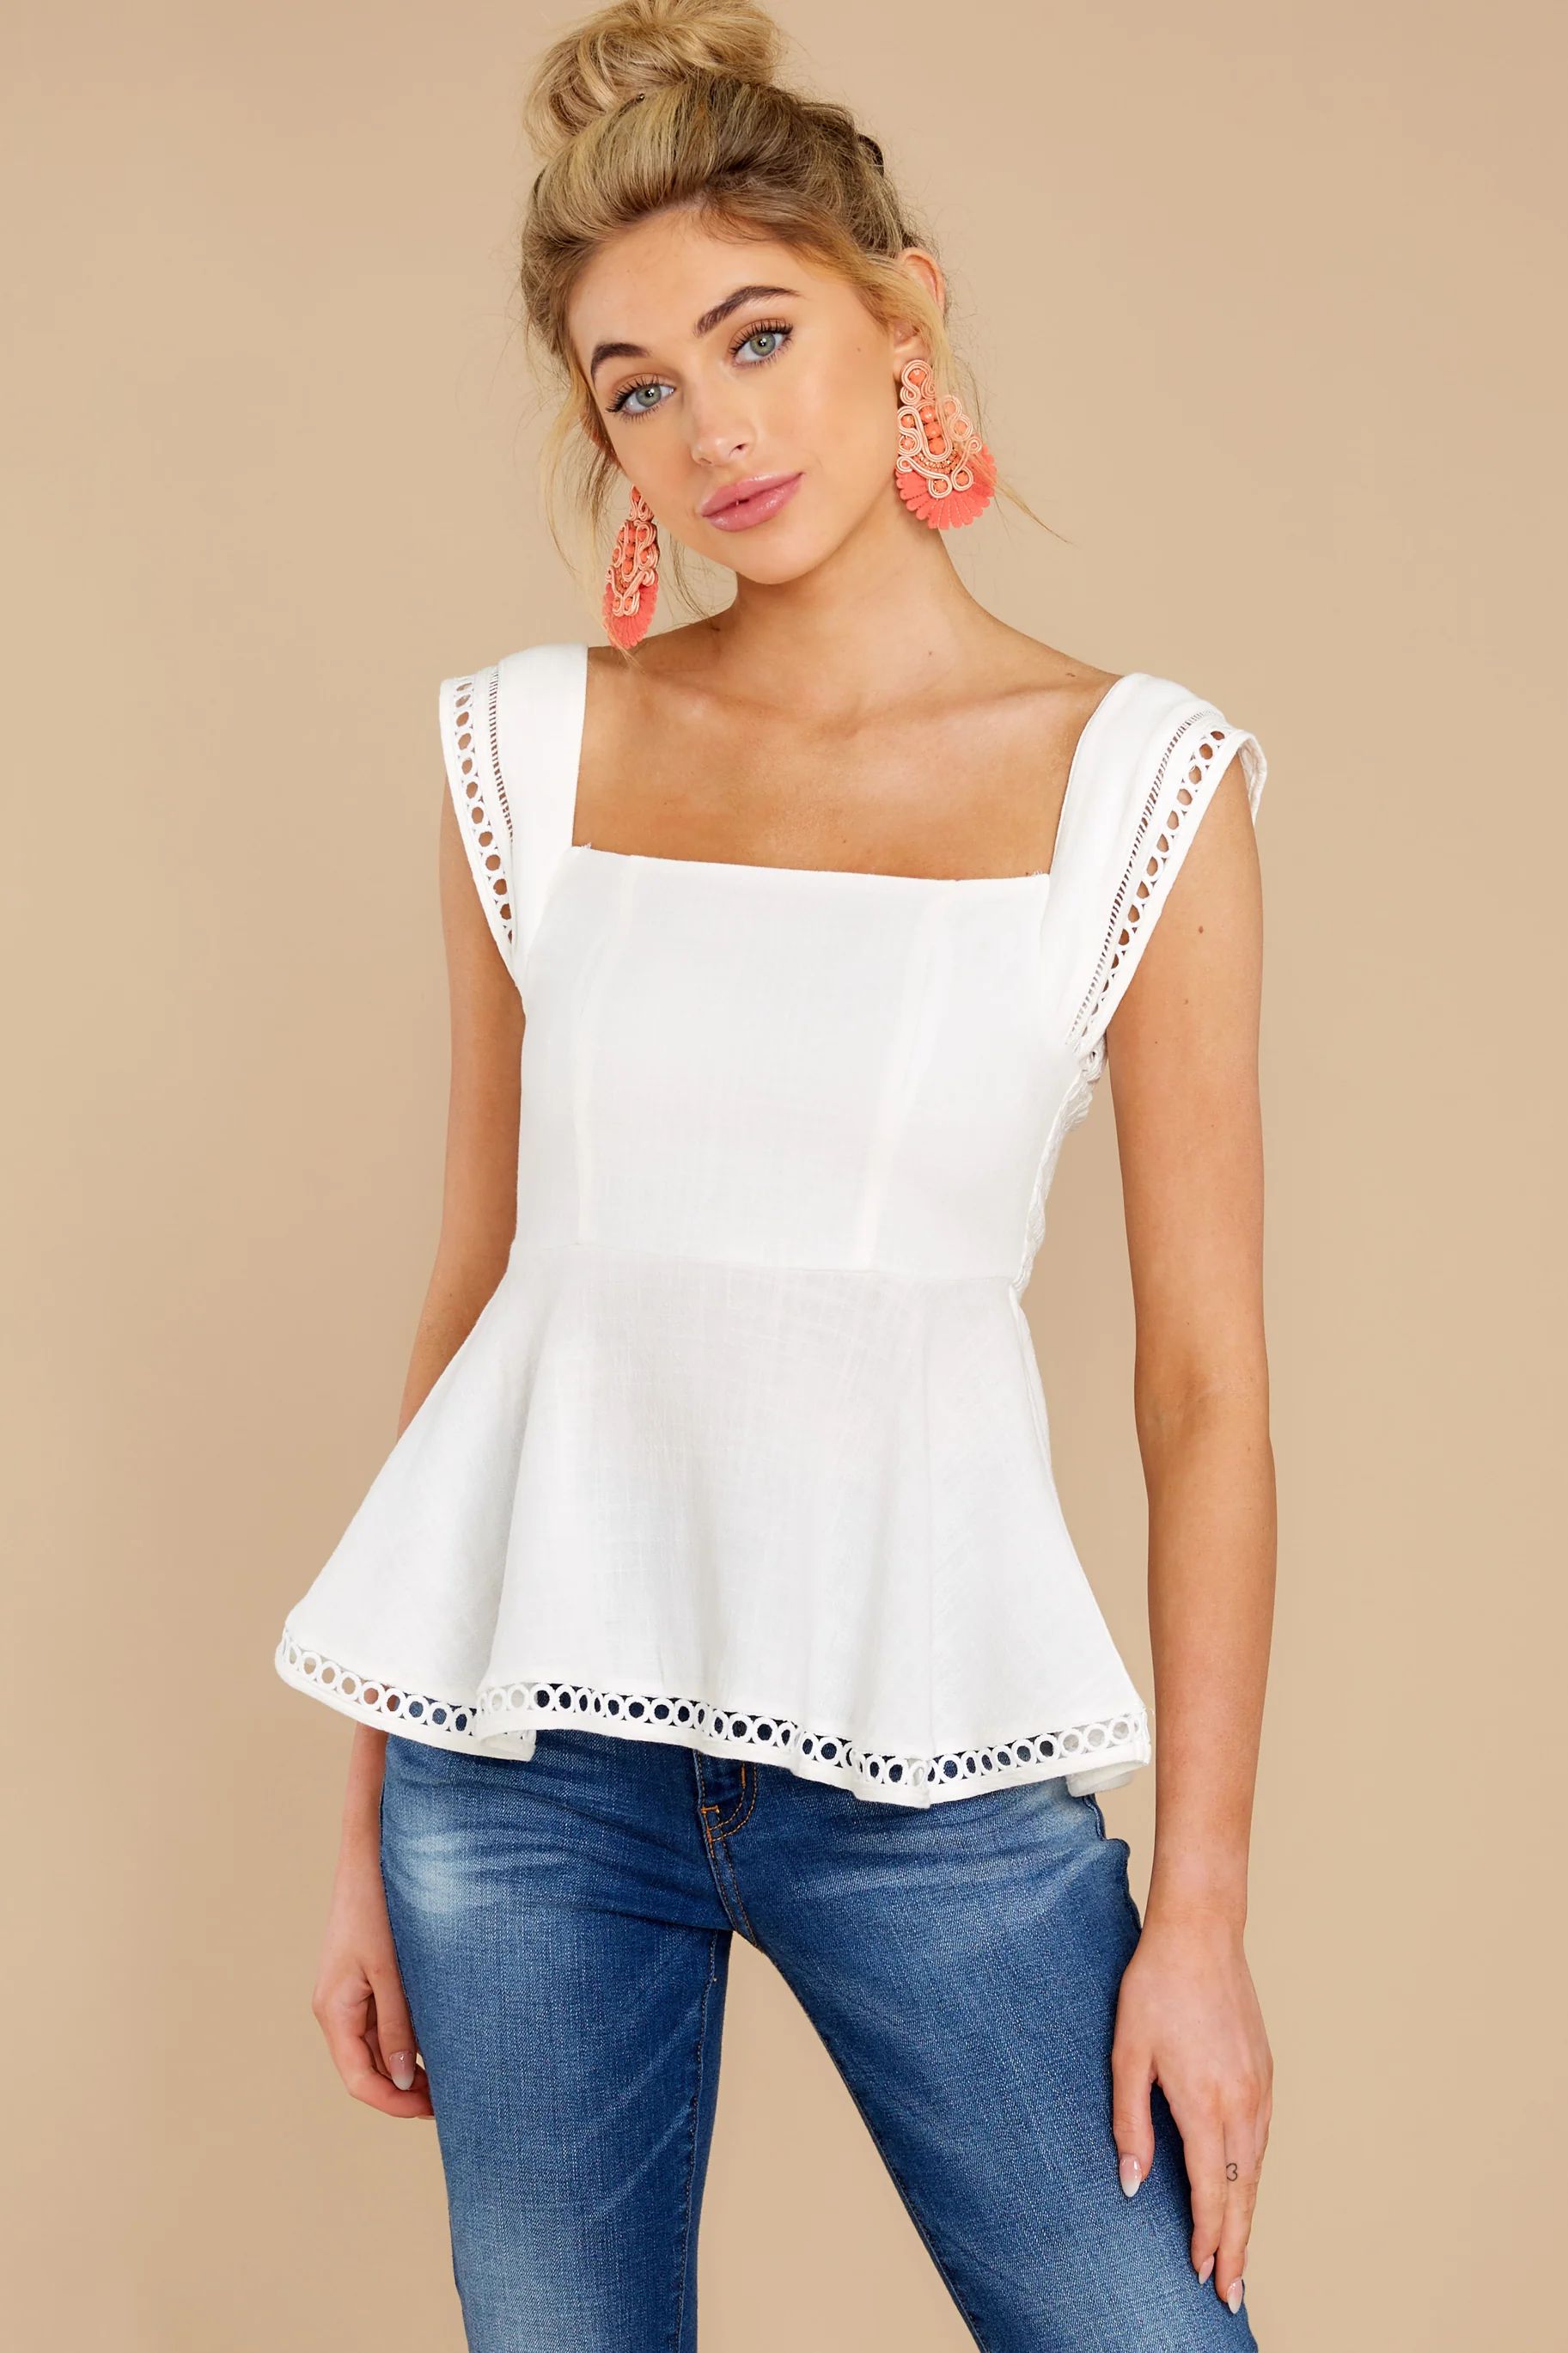 Looking Divine White Eyelet Top | Red Dress 